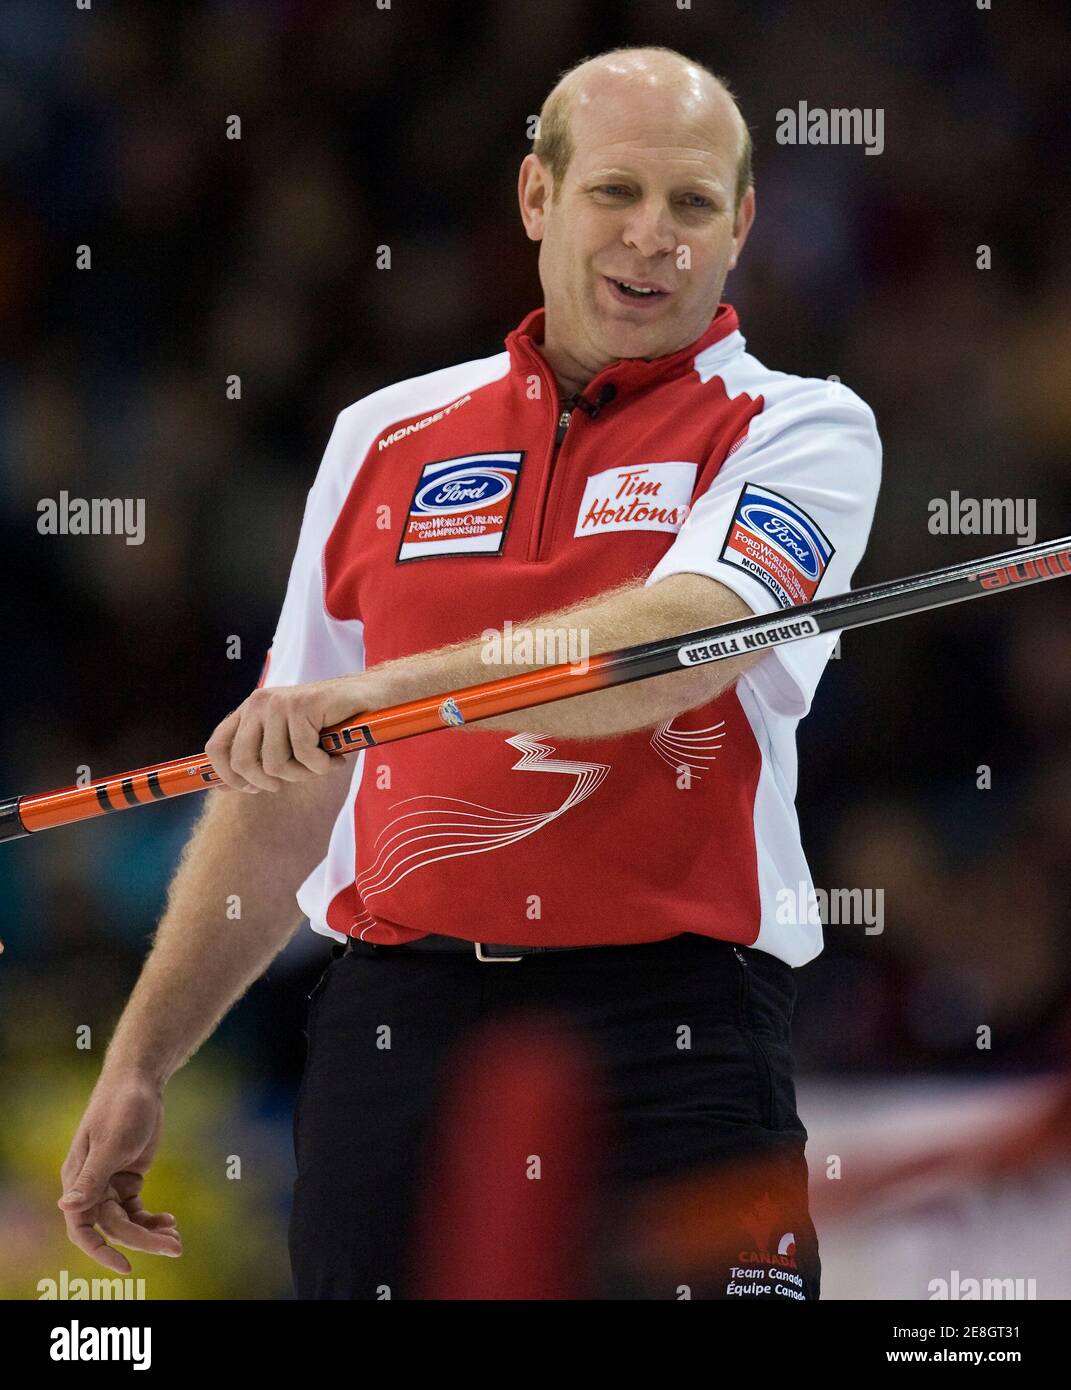 Canada's skip Kevin Martin reacts to one of his shots during their game against Norway at the World Men's Curling Championships in Moncton, New Brunswick April 7, 2009. Canada is currently undefeated in the championship with a record of 7-0.         REUTERS/Andy Clark     (CANADA SPORT CURLING) Stock Photo